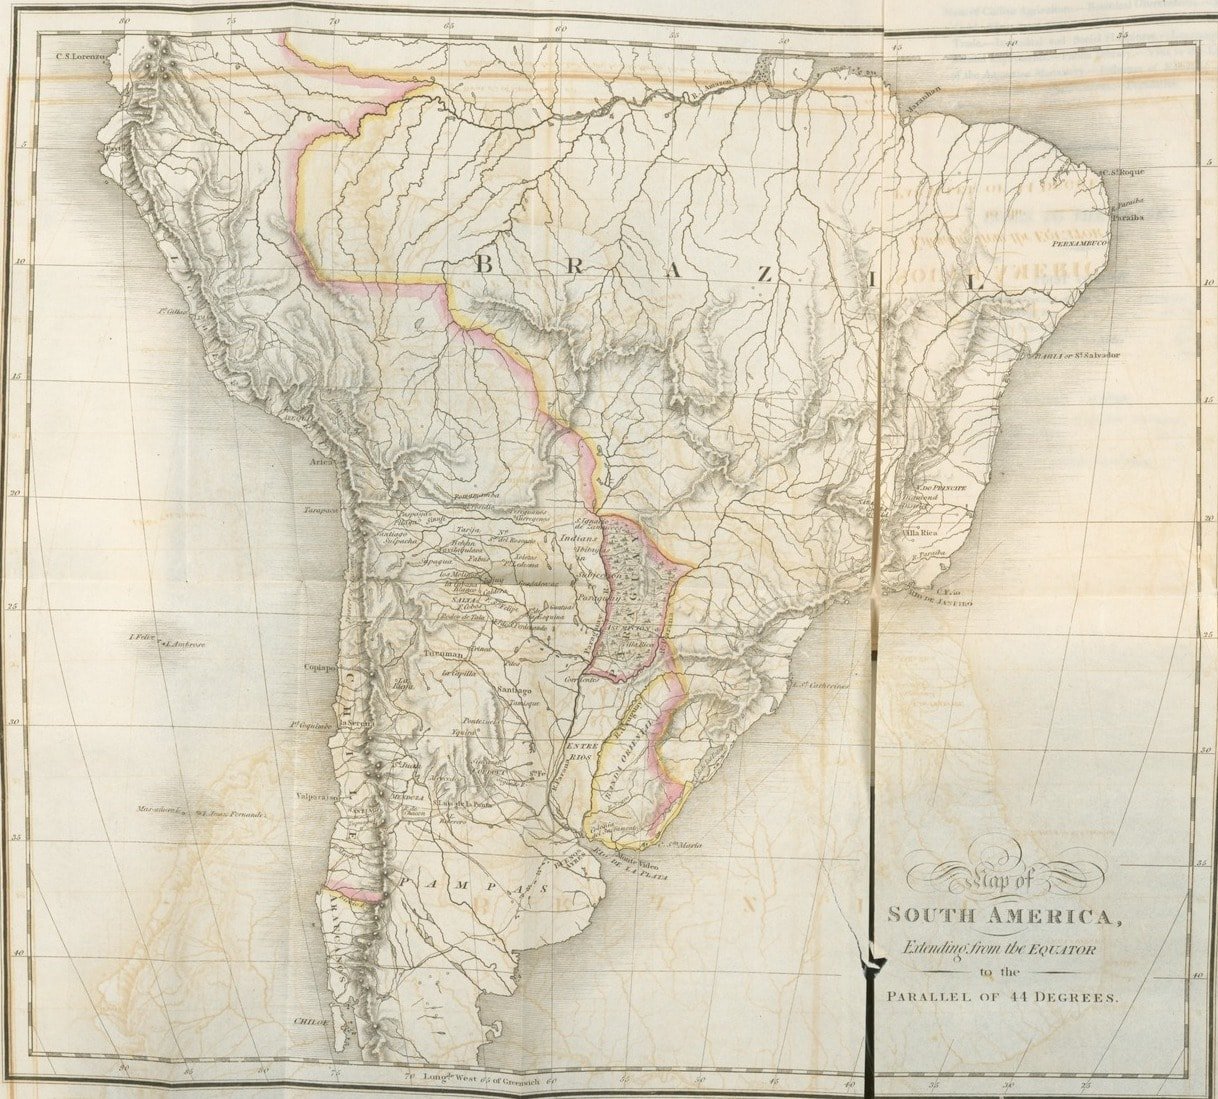 1825 map of the Americas